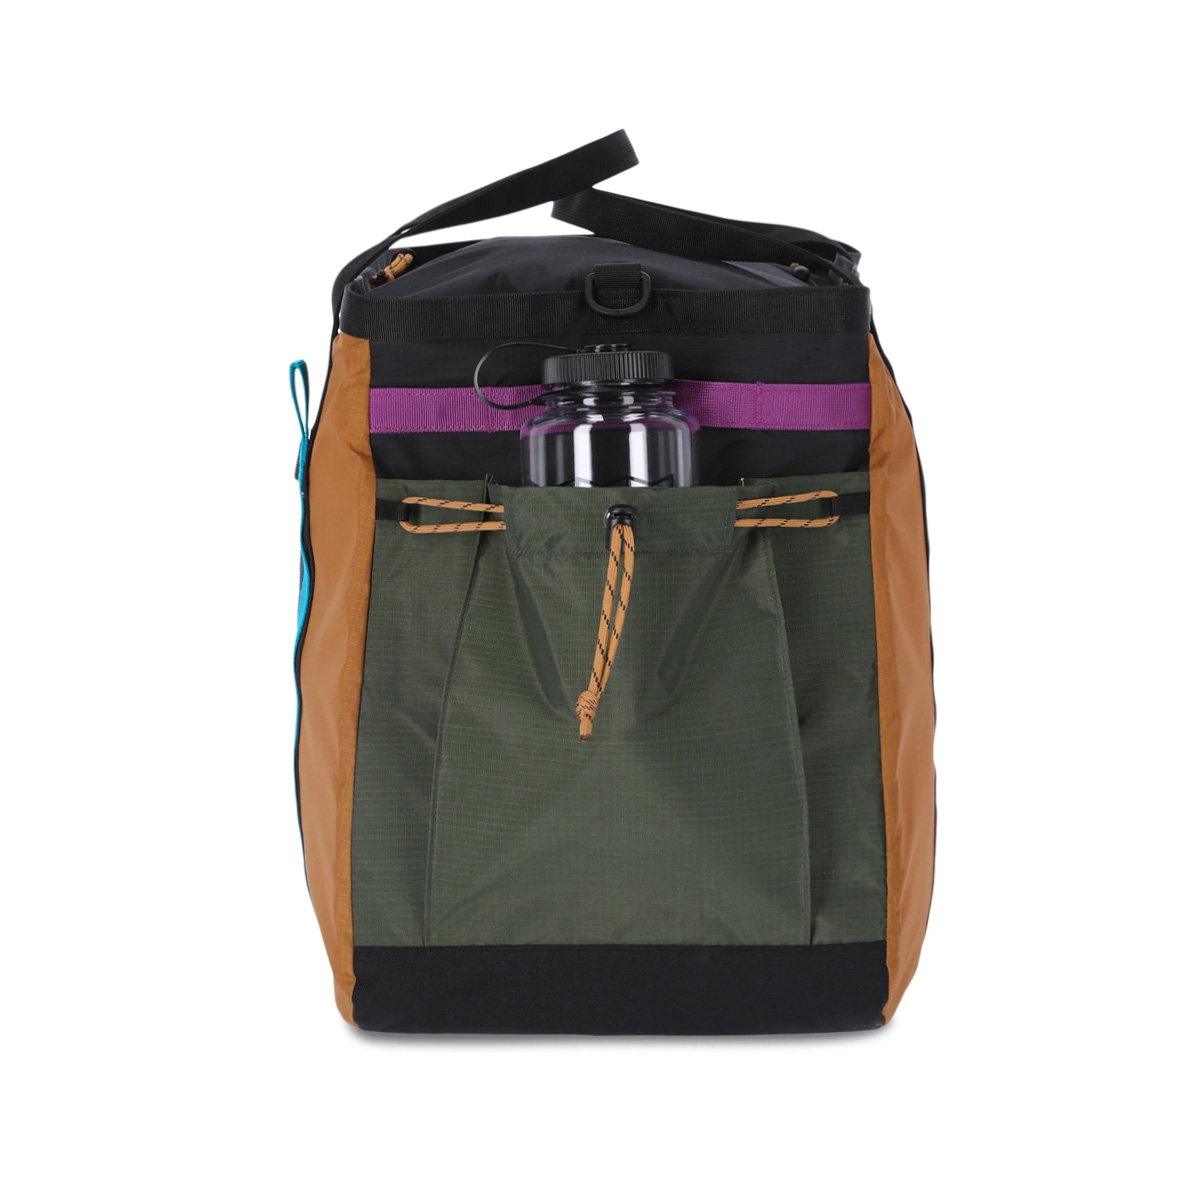 Topo Designs Mountain Gear Bag, Expandable cinch side pockets for additional storage